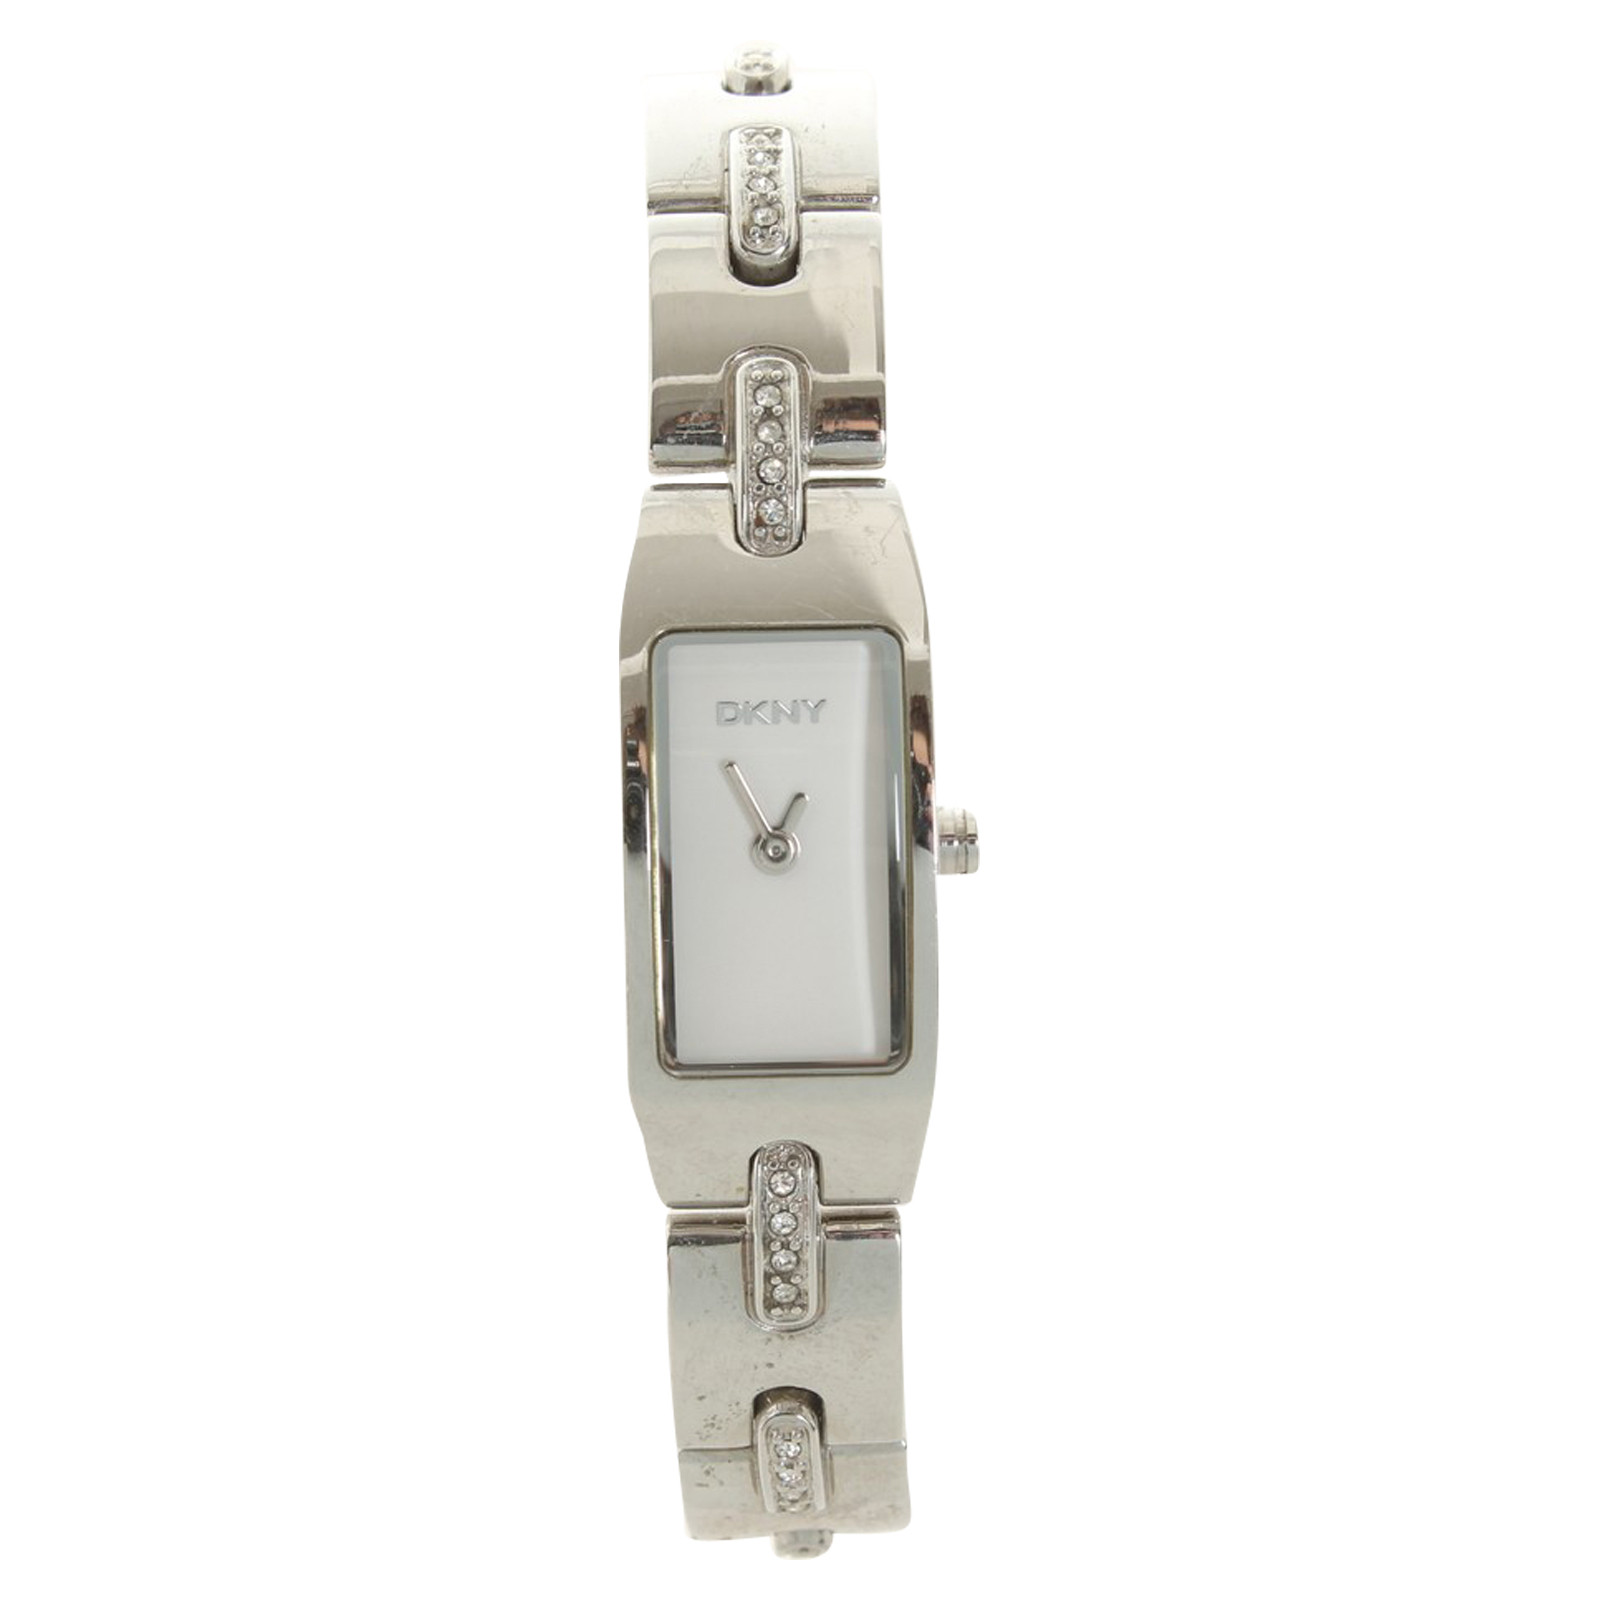 Dkny Watch in Silvery - Second Hand Dkny Watch in Silvery buy used for 40€  (6326154)